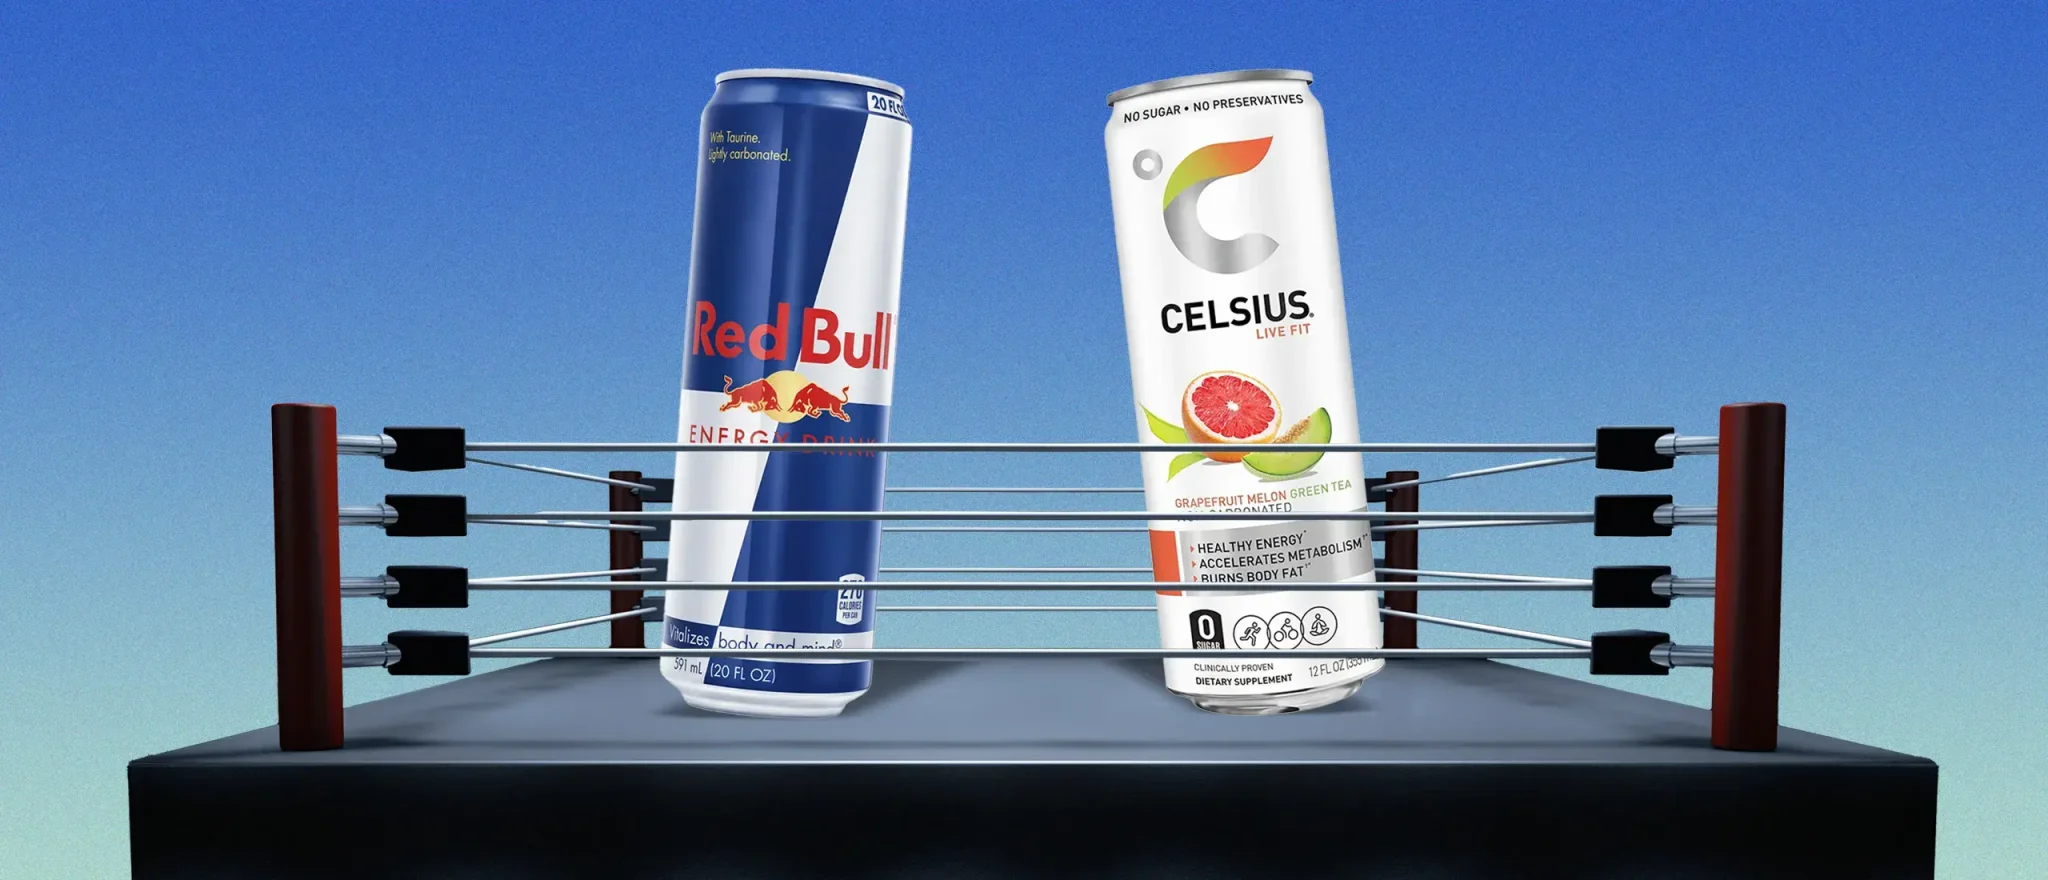 Red Bull vs. Celsius: Which Energy Drink Is Better for You?